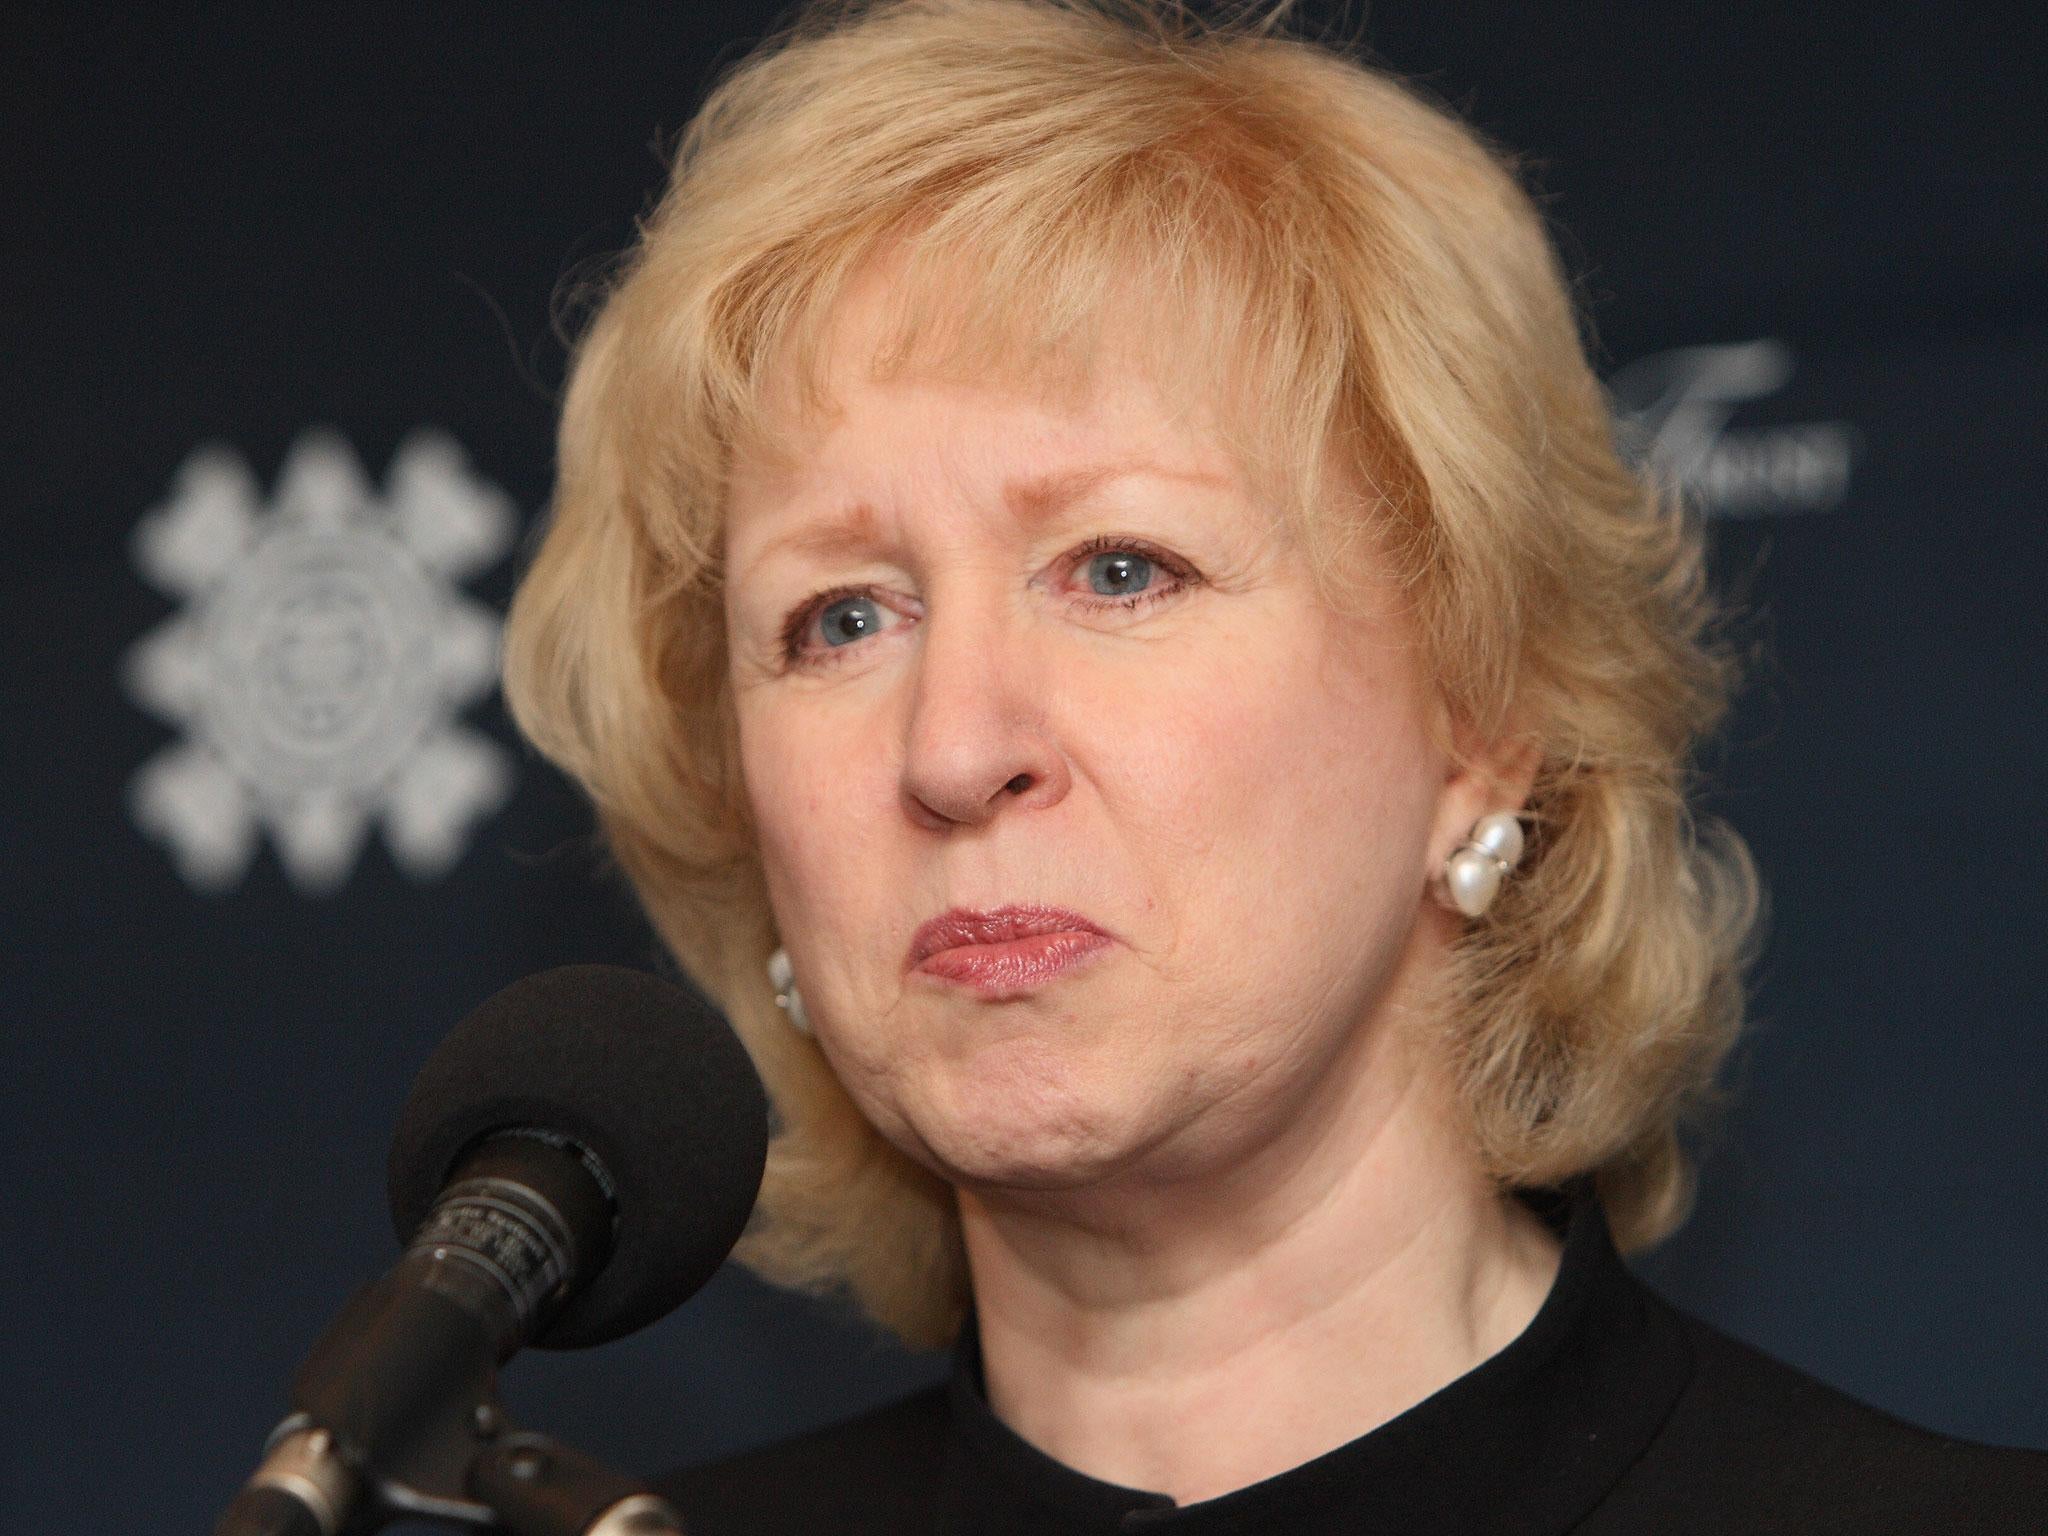 'I am struck by how many women on television news wear sleeveless dresses- often when sitting with suited men', says Kim Campbell, who served as Prime Minister briefly in 1993